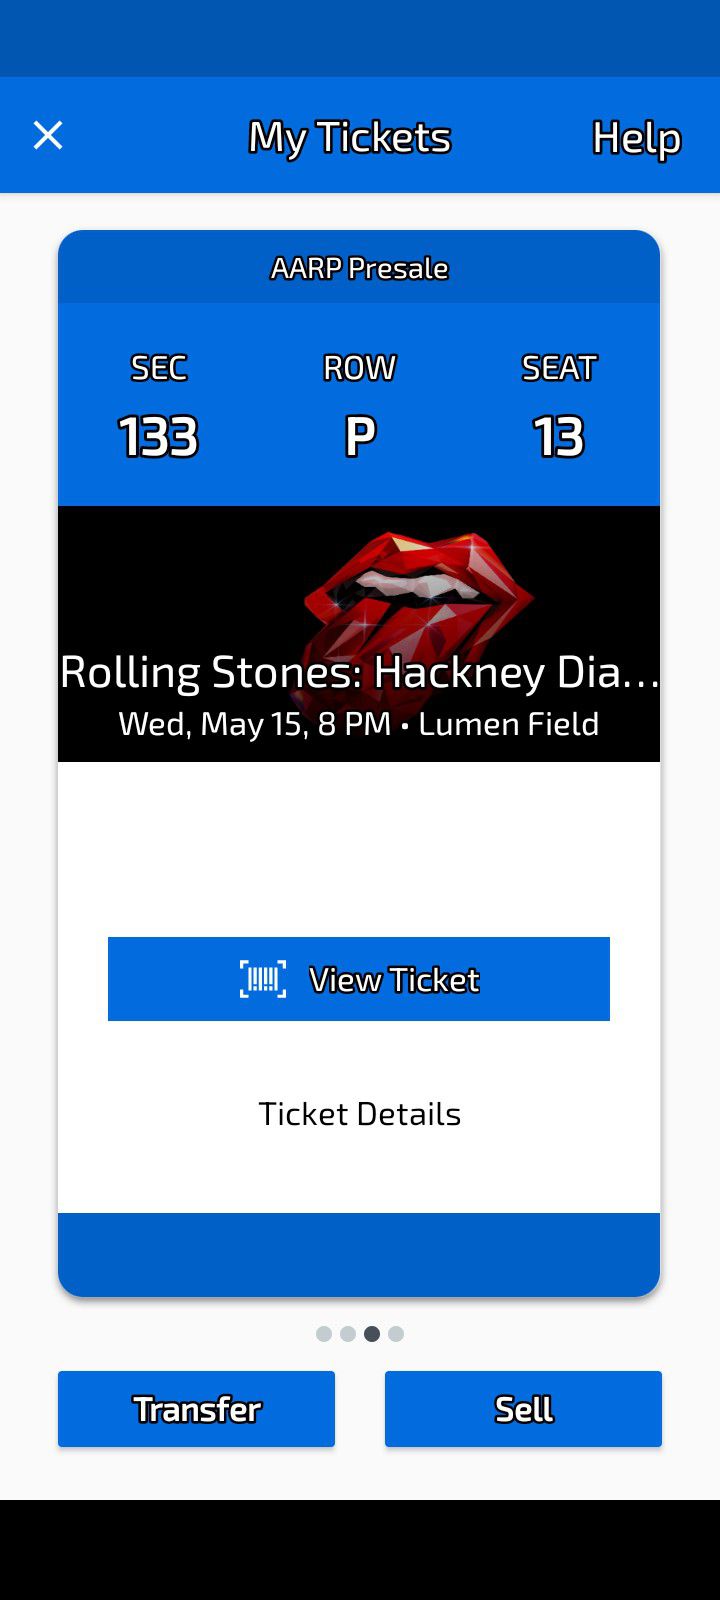 Rolling Stones tickets $250 off face